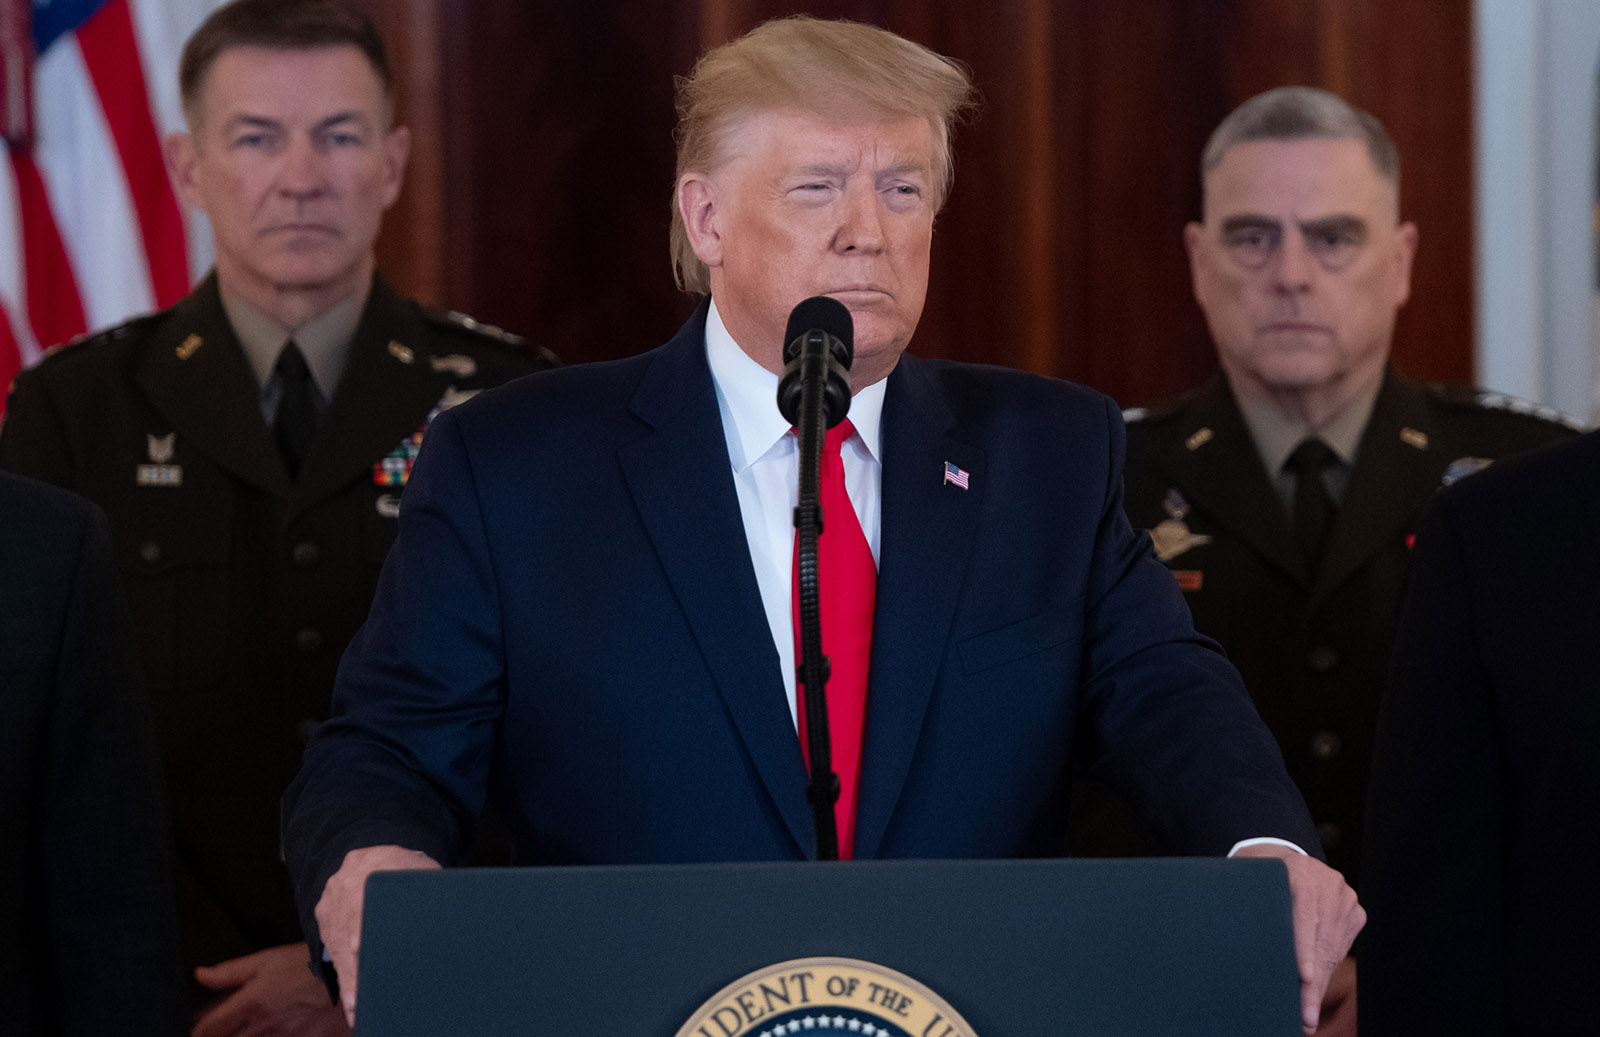 President Donald Trump speaking about the situation with Iran at the White House, Washington, D.C., January 8, 2020